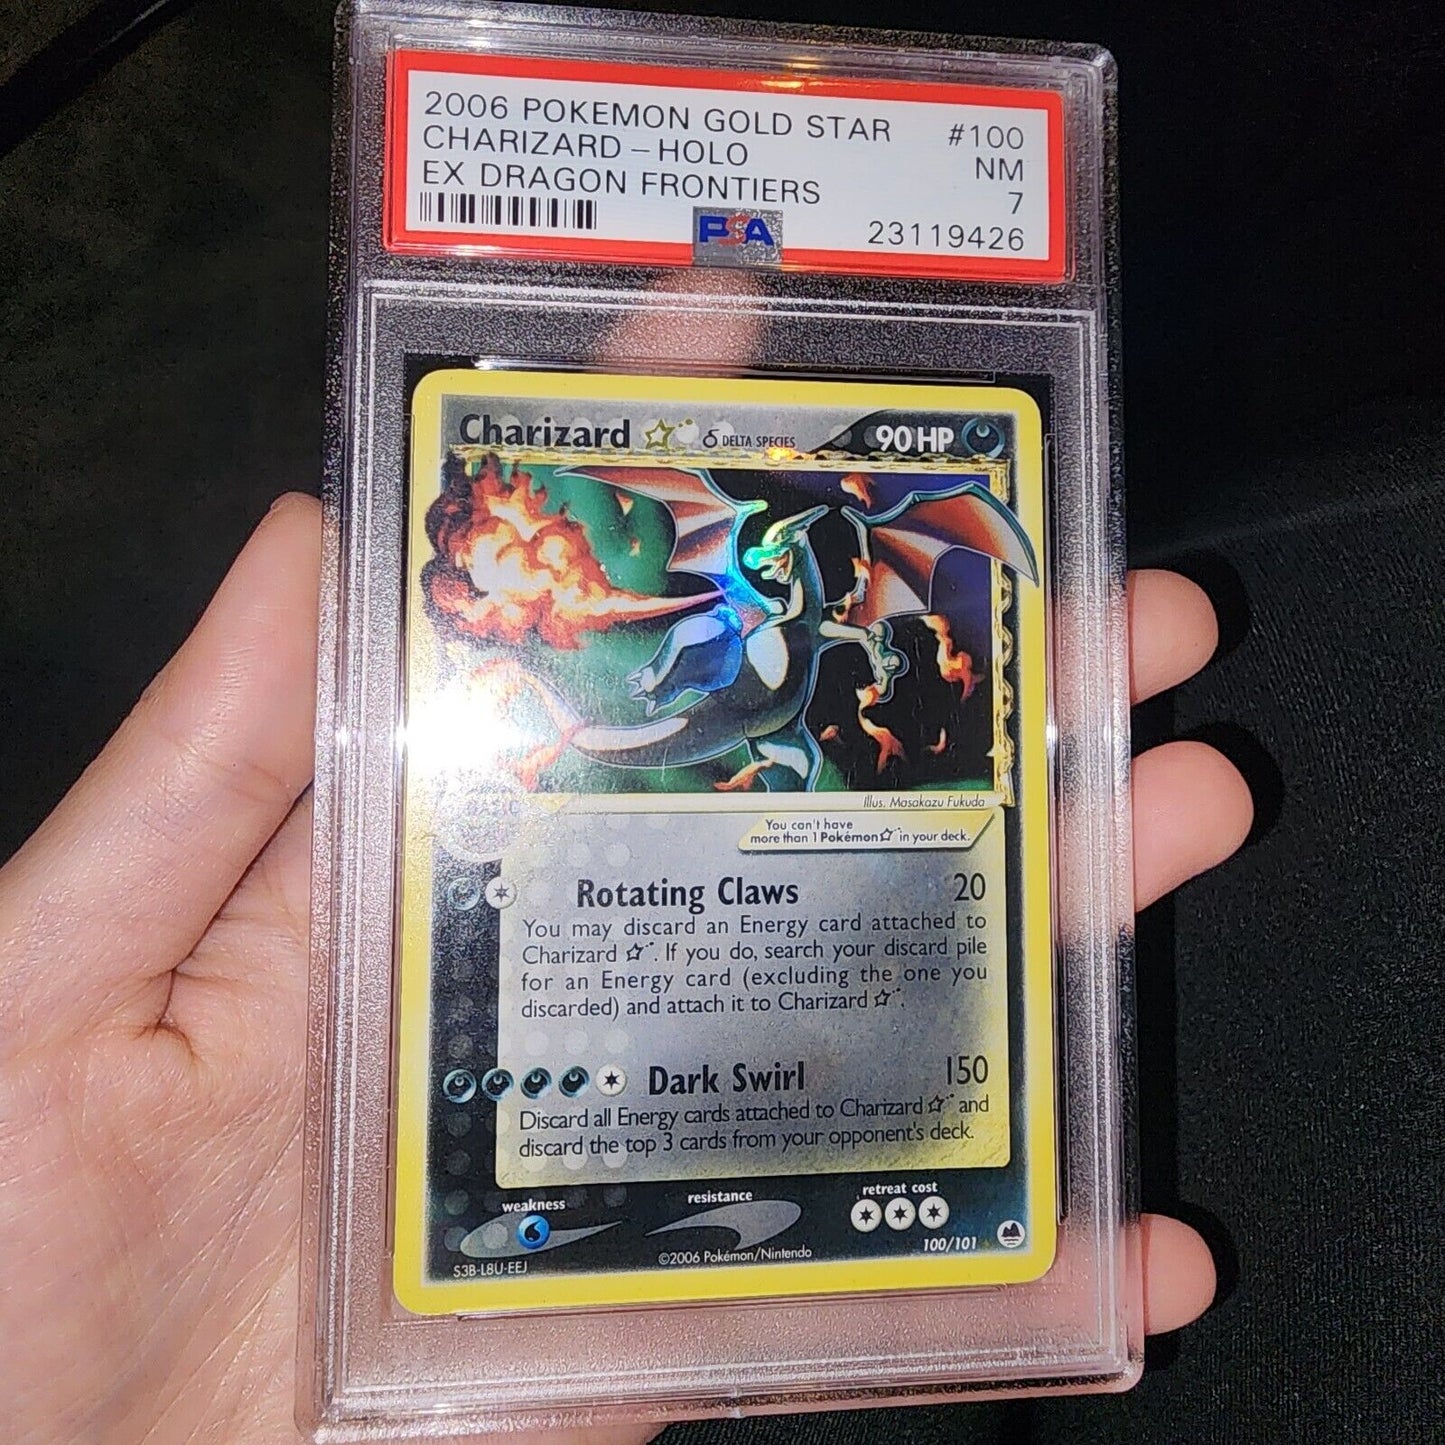 2006 Gold Star Charizard Holo Ex Dragons Frontiers PSA 7